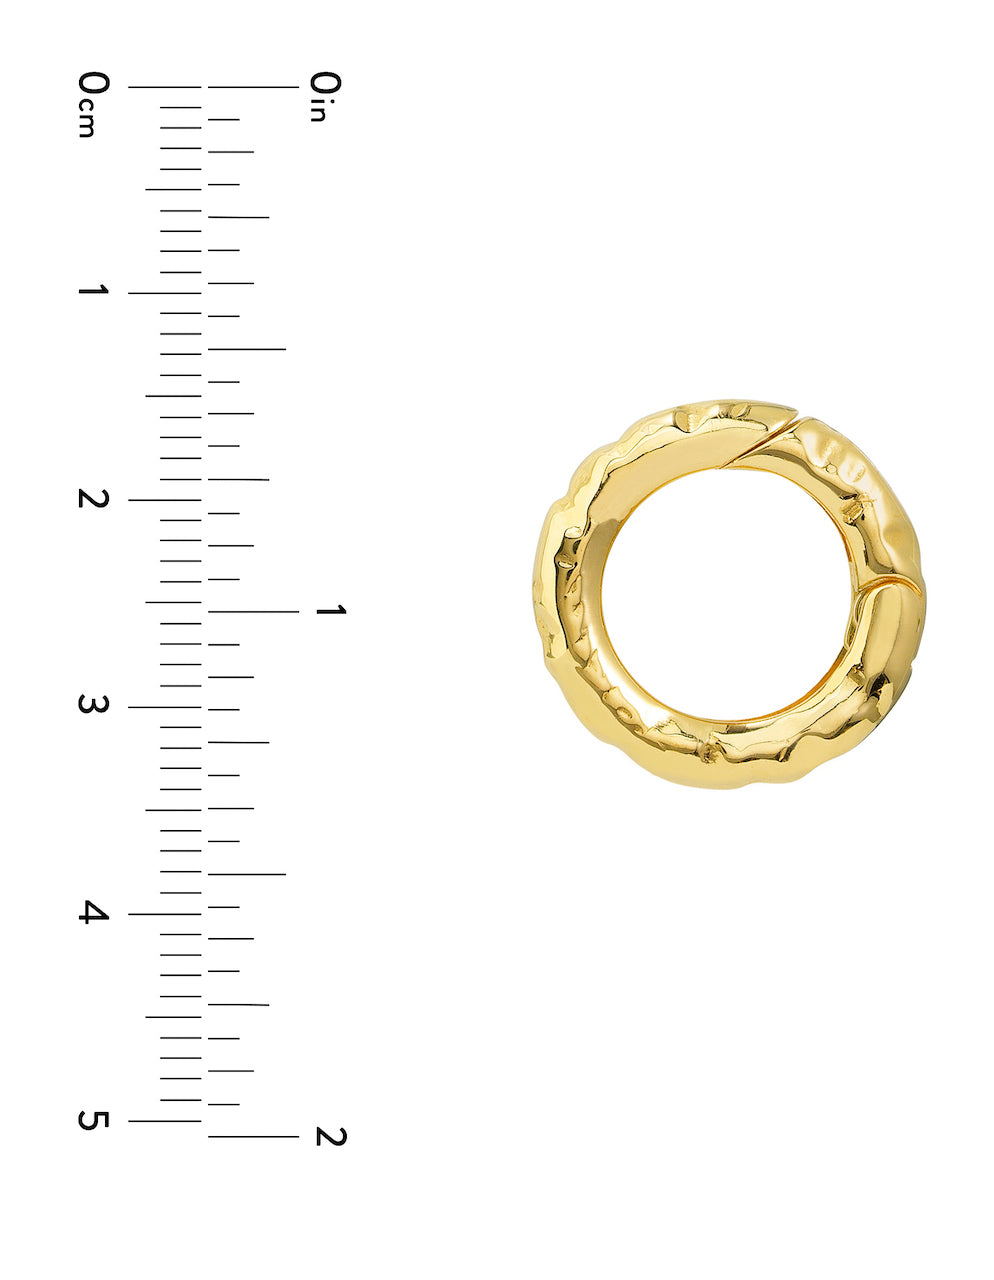 14K Yellow Gold 19.5mm Round Hammered Push Clasp Lock Connector Enhancer Hanger for Pendants Charms Bracelets Anklets Necklaces